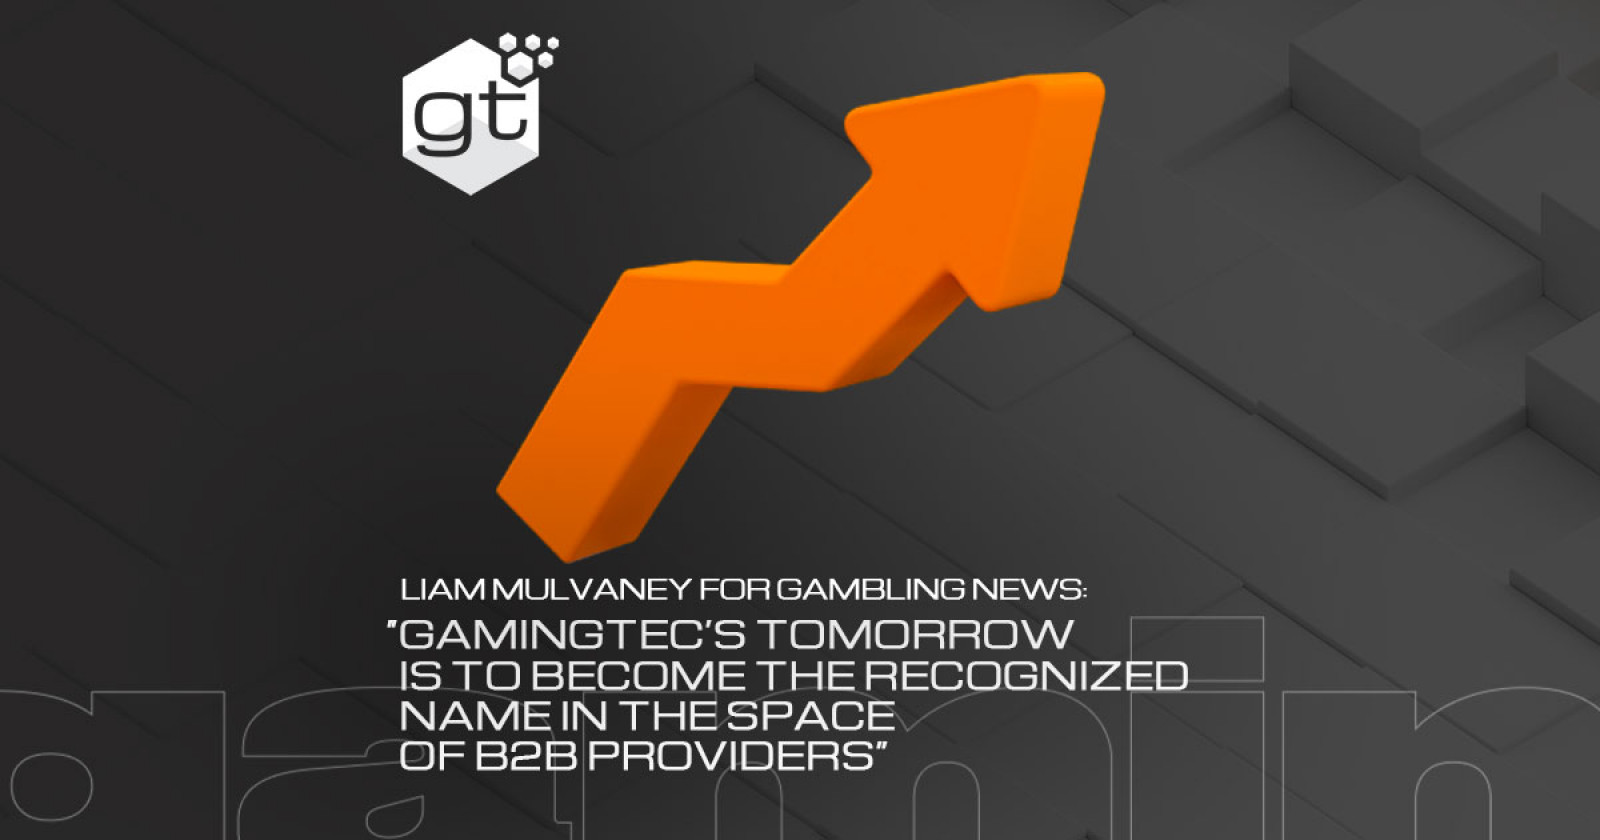 Liam Mulvaney for Gambling News: “Gamingtec’s Tomorrow Is to Become the Recognized Name in the Space of B2B Providers”